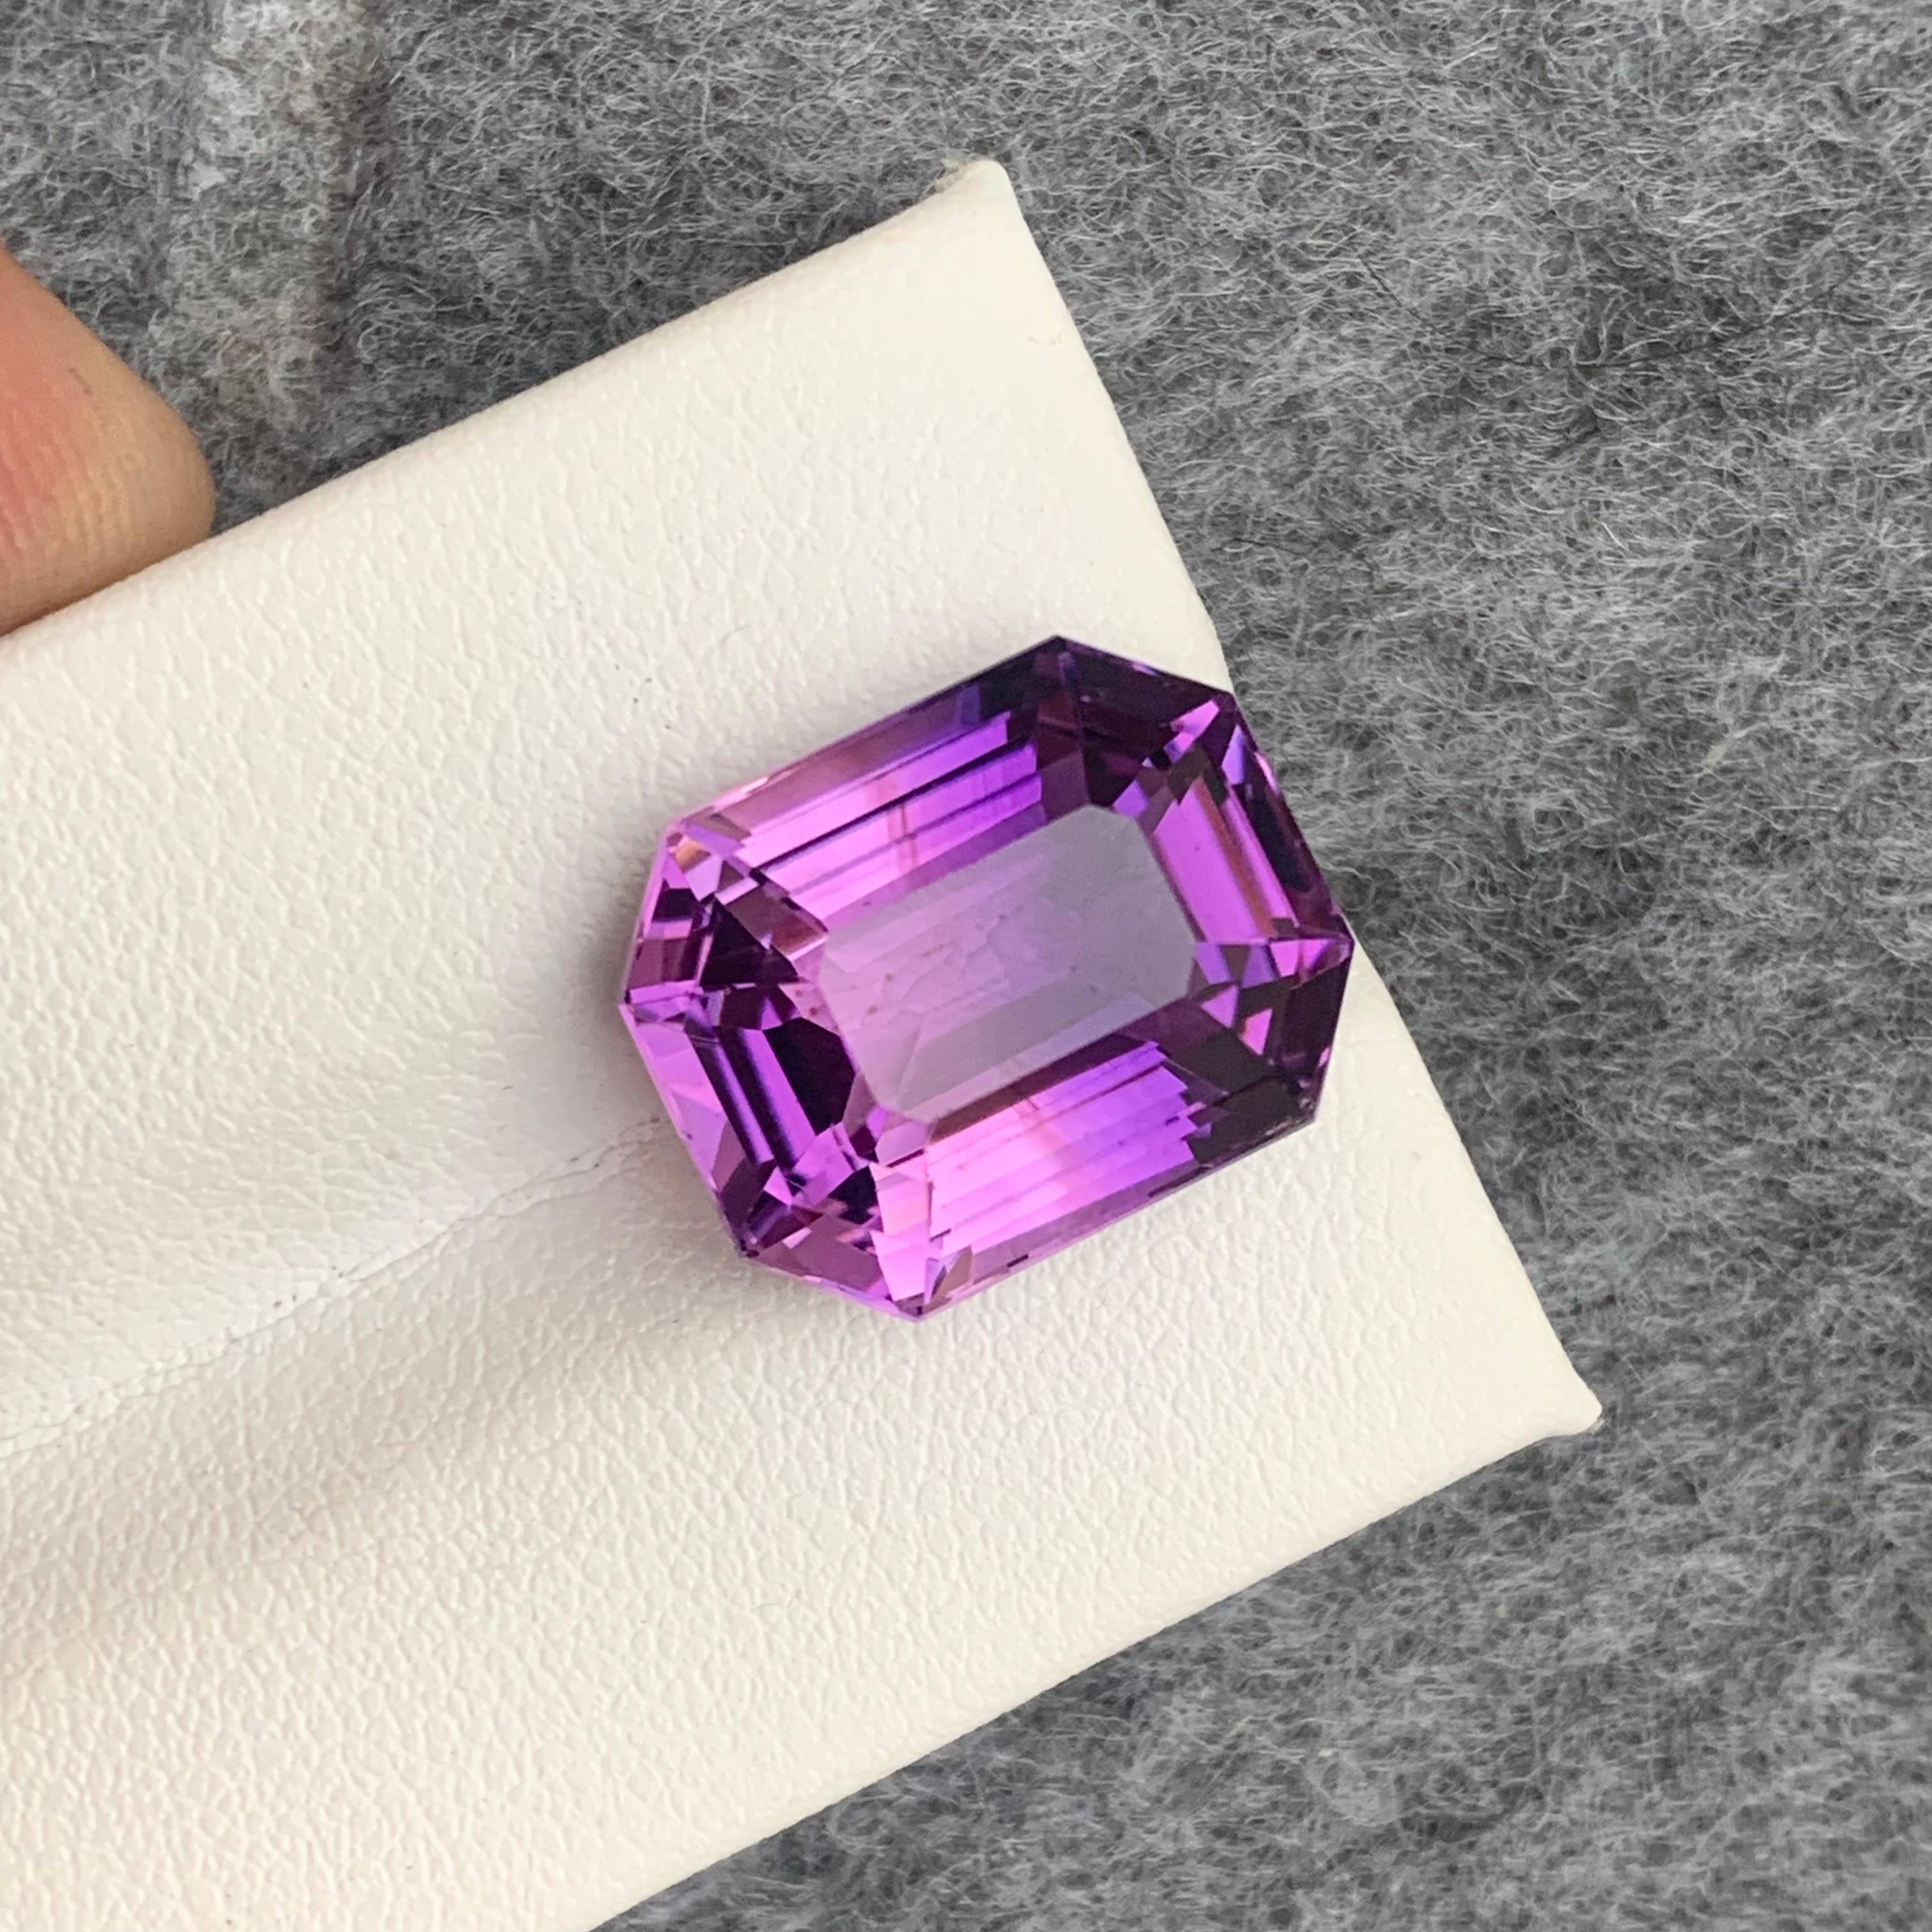 Gemstone Type : Amethyst
Weight : 13.50 Carats
Dimensions : 16.2x13x9.7 mm
Clarity : Eye Clean
Origin : Brazil
Color: Purple
Shape: Emerald
Certificate: On Demand
Month: February
Purported amethyst powers for healing
enhancing the immune